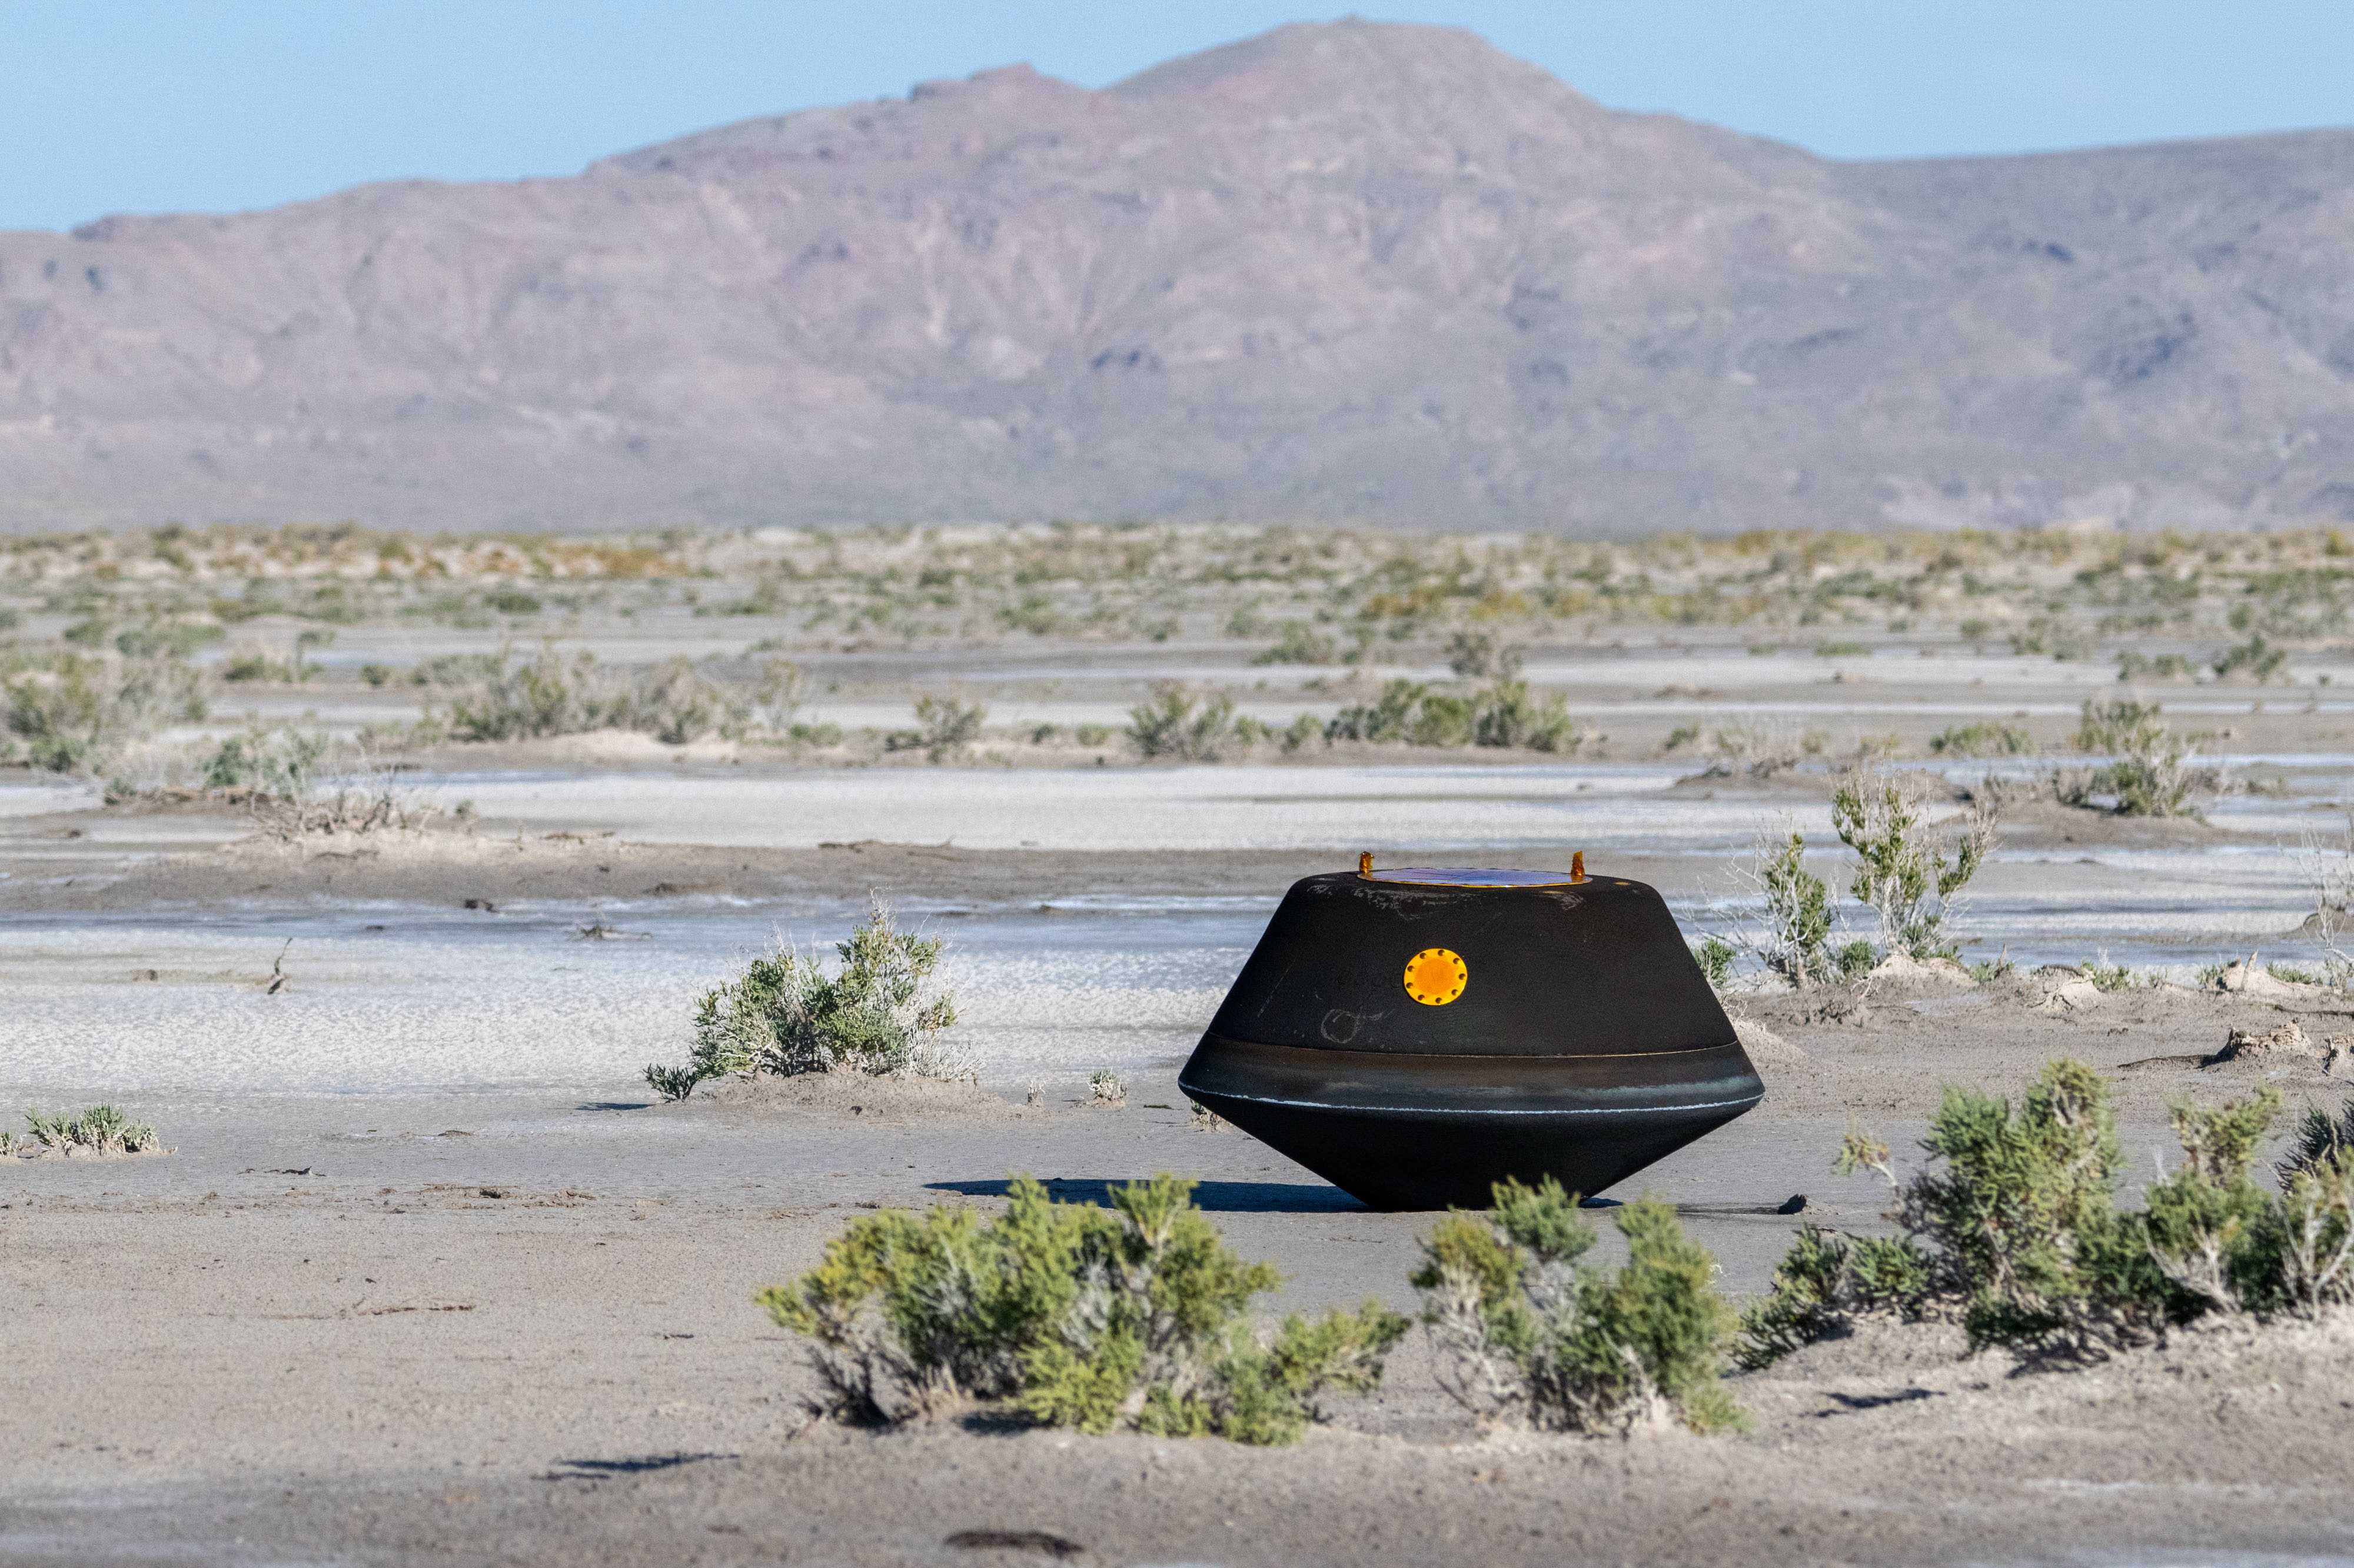 A black capsule sits in the desert surrounded by scattered plants.